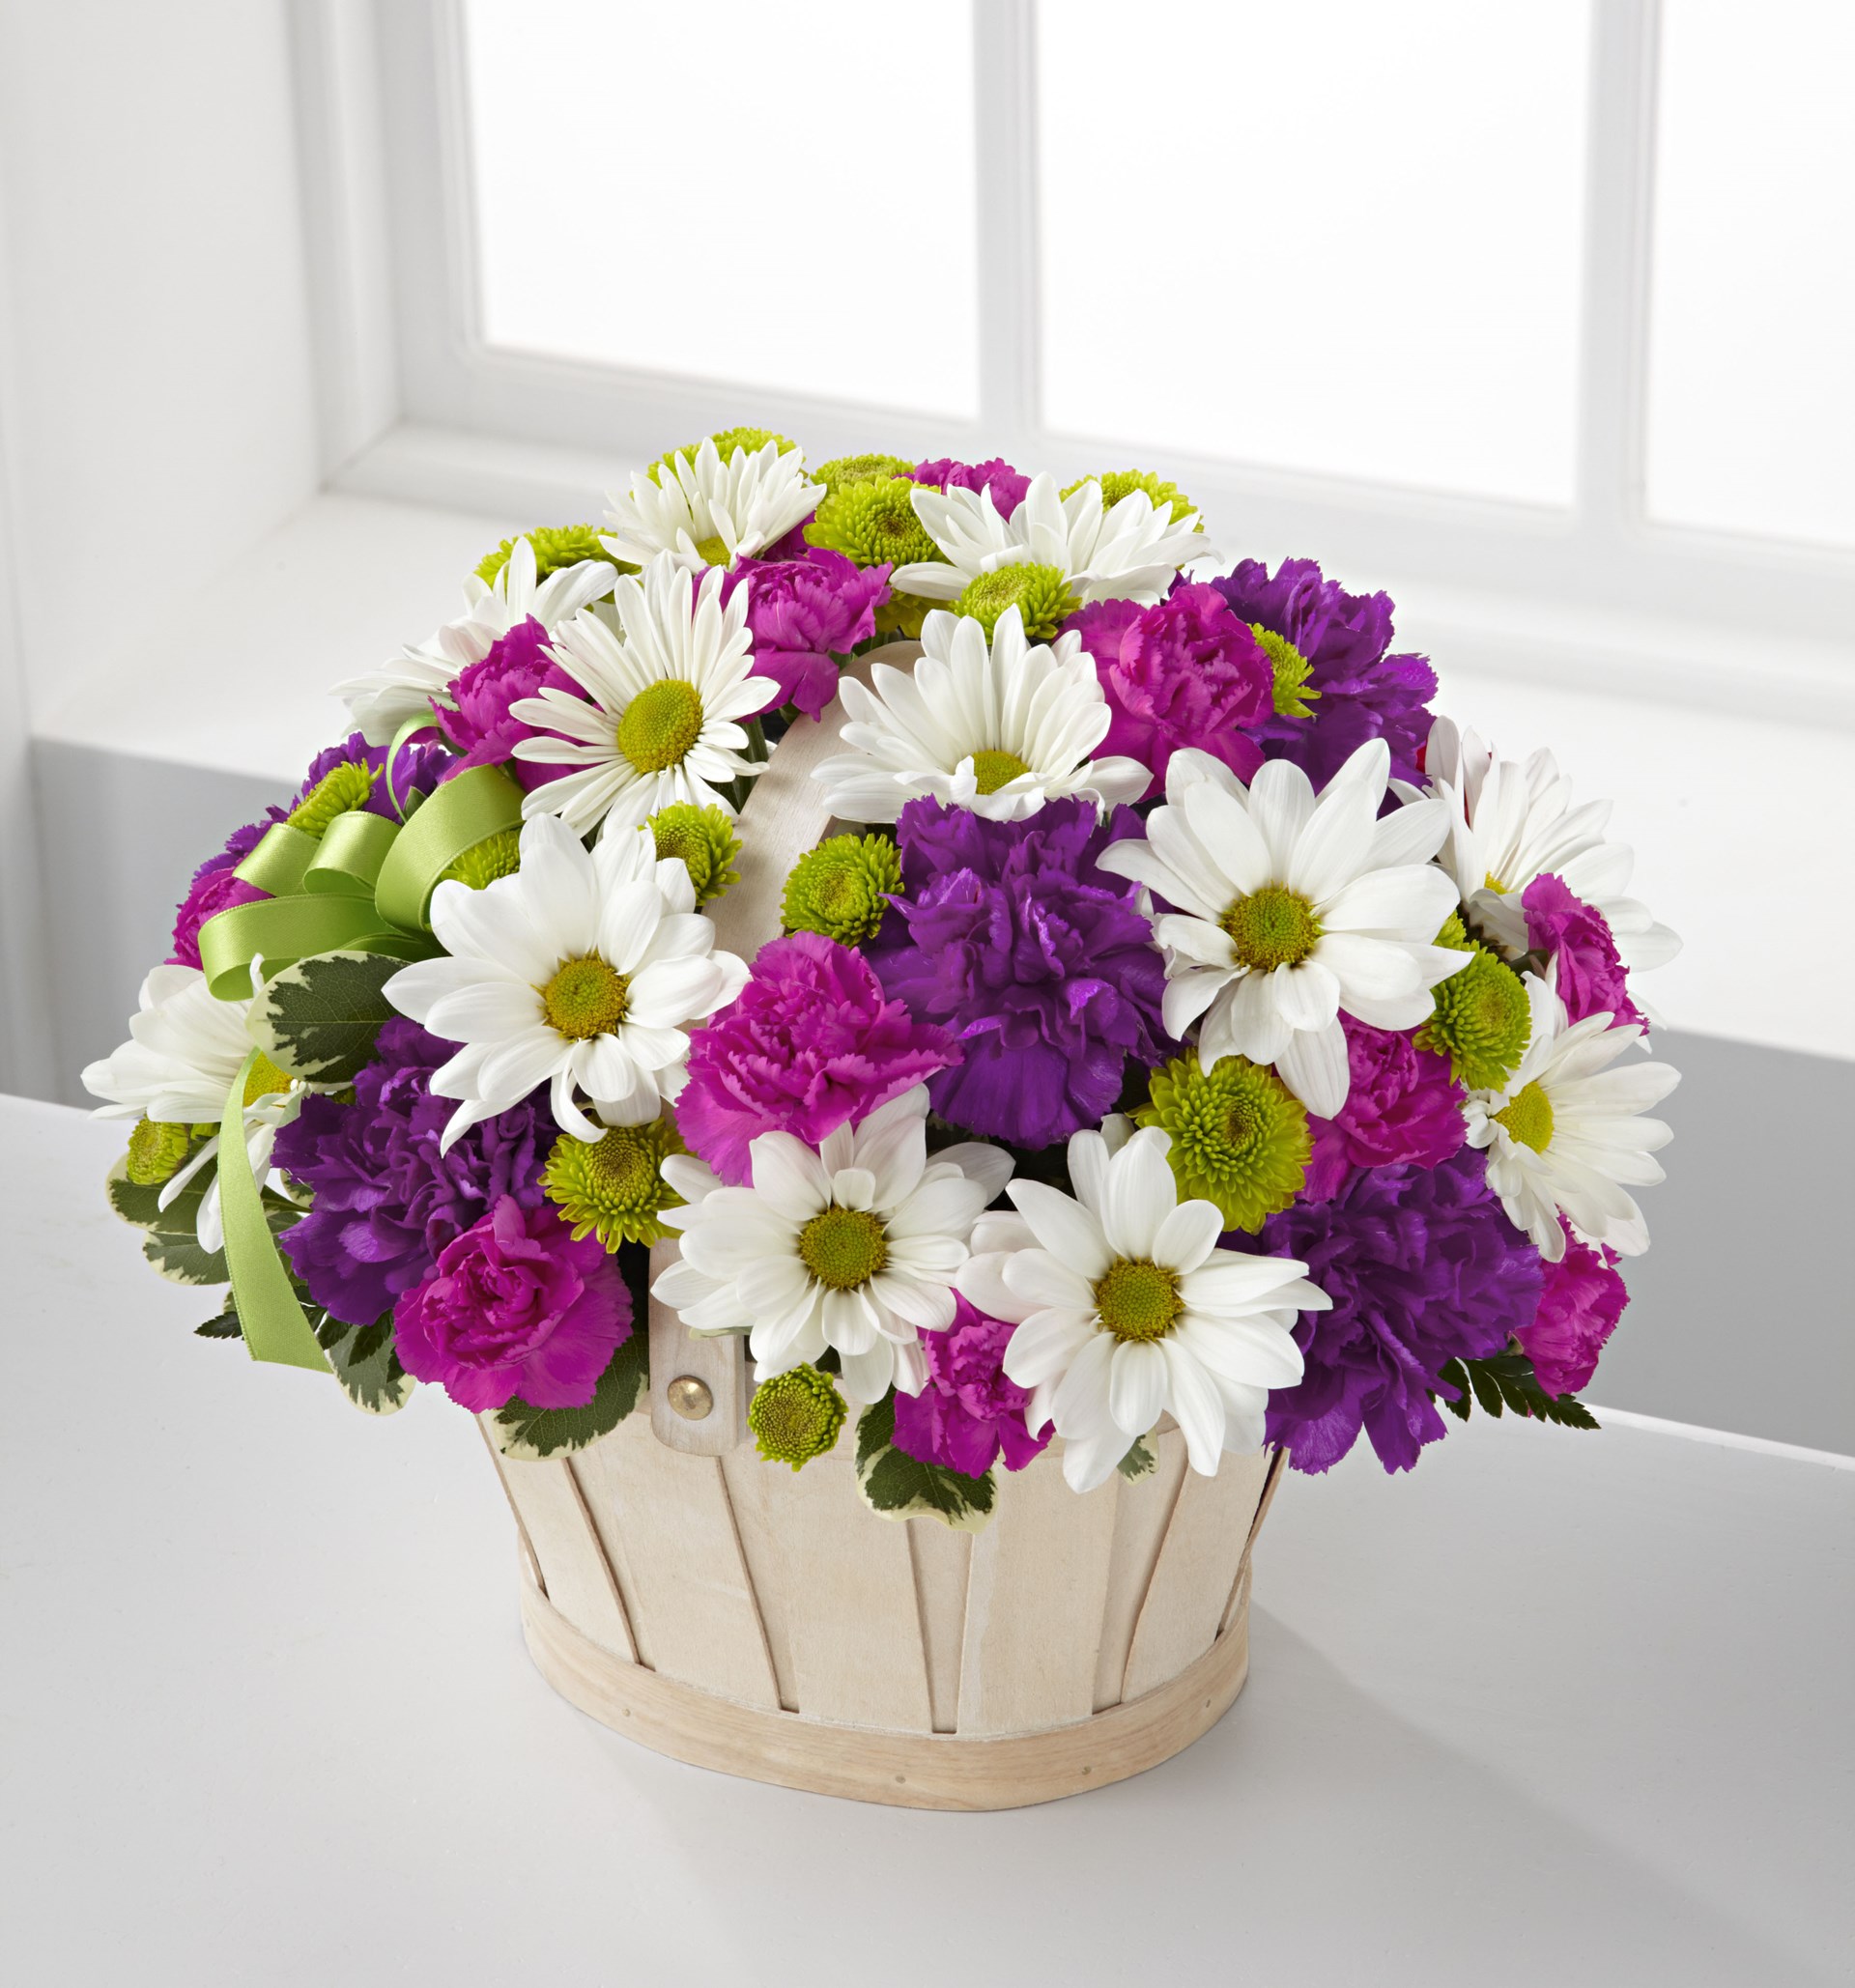 Blooming Bounty Bouquet Basket included